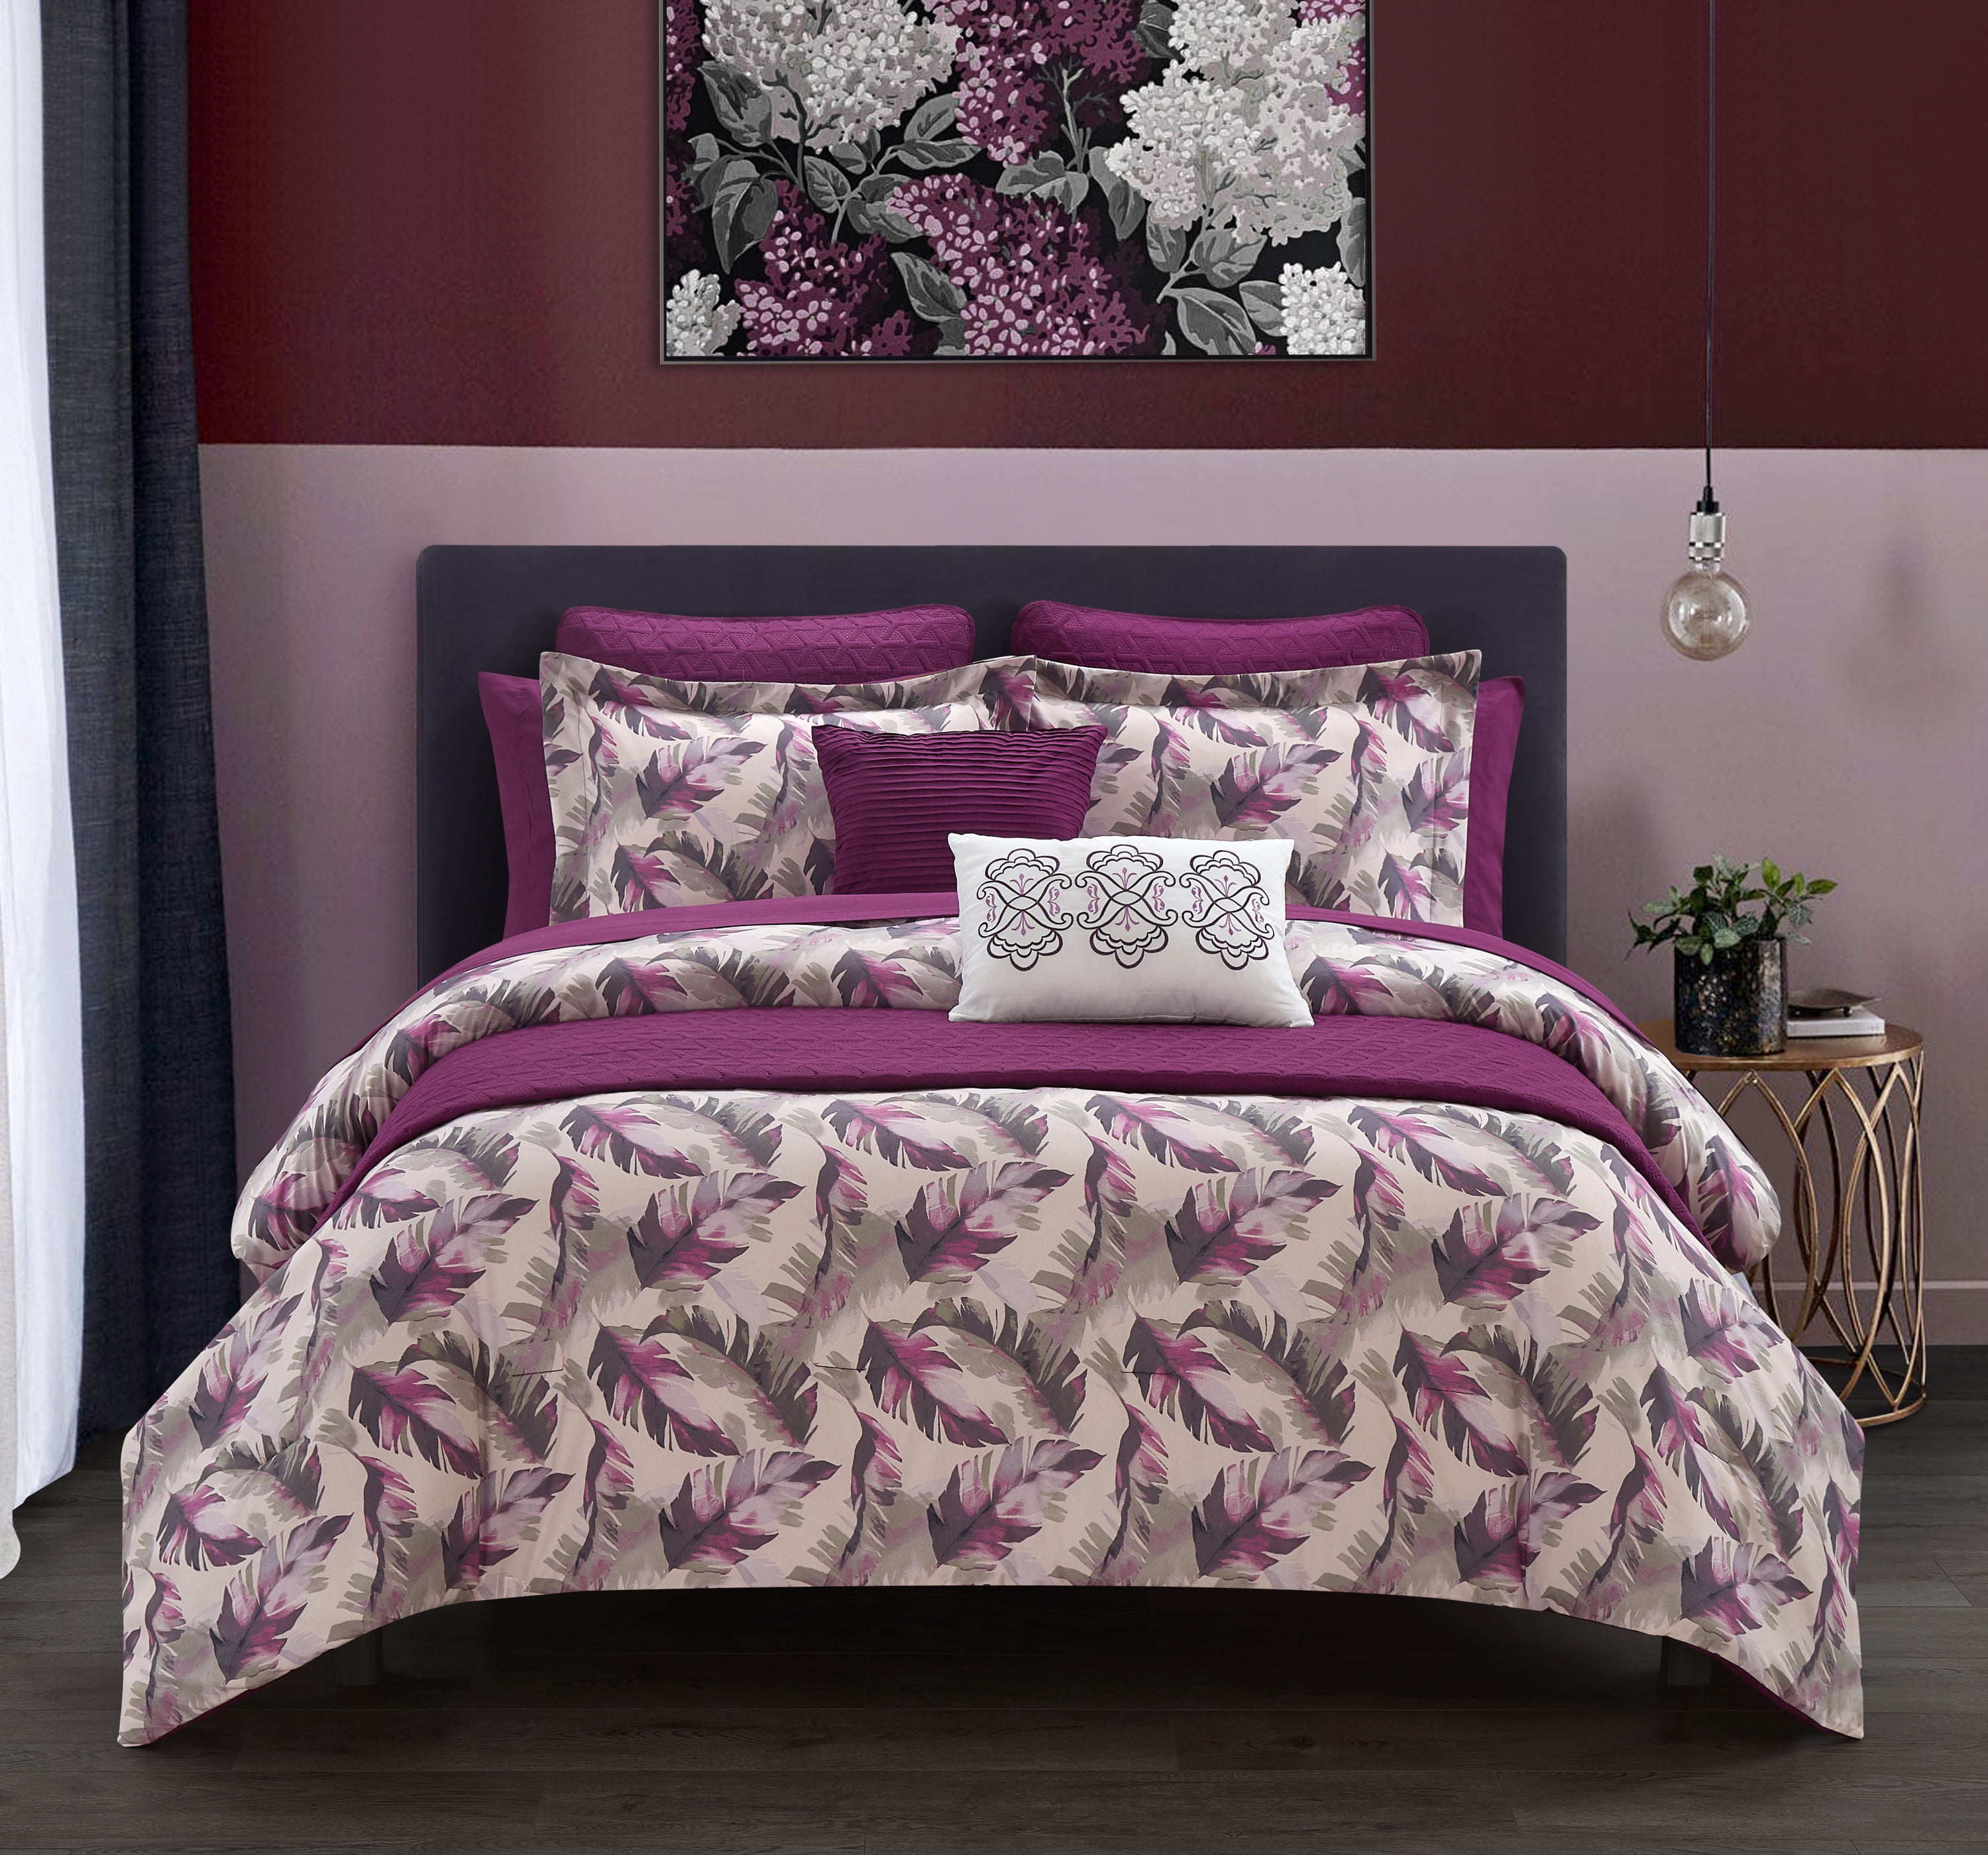 New Purple Floral Queen Size Comforter Set Bedding Bedspread Bed in a Bag Sheets